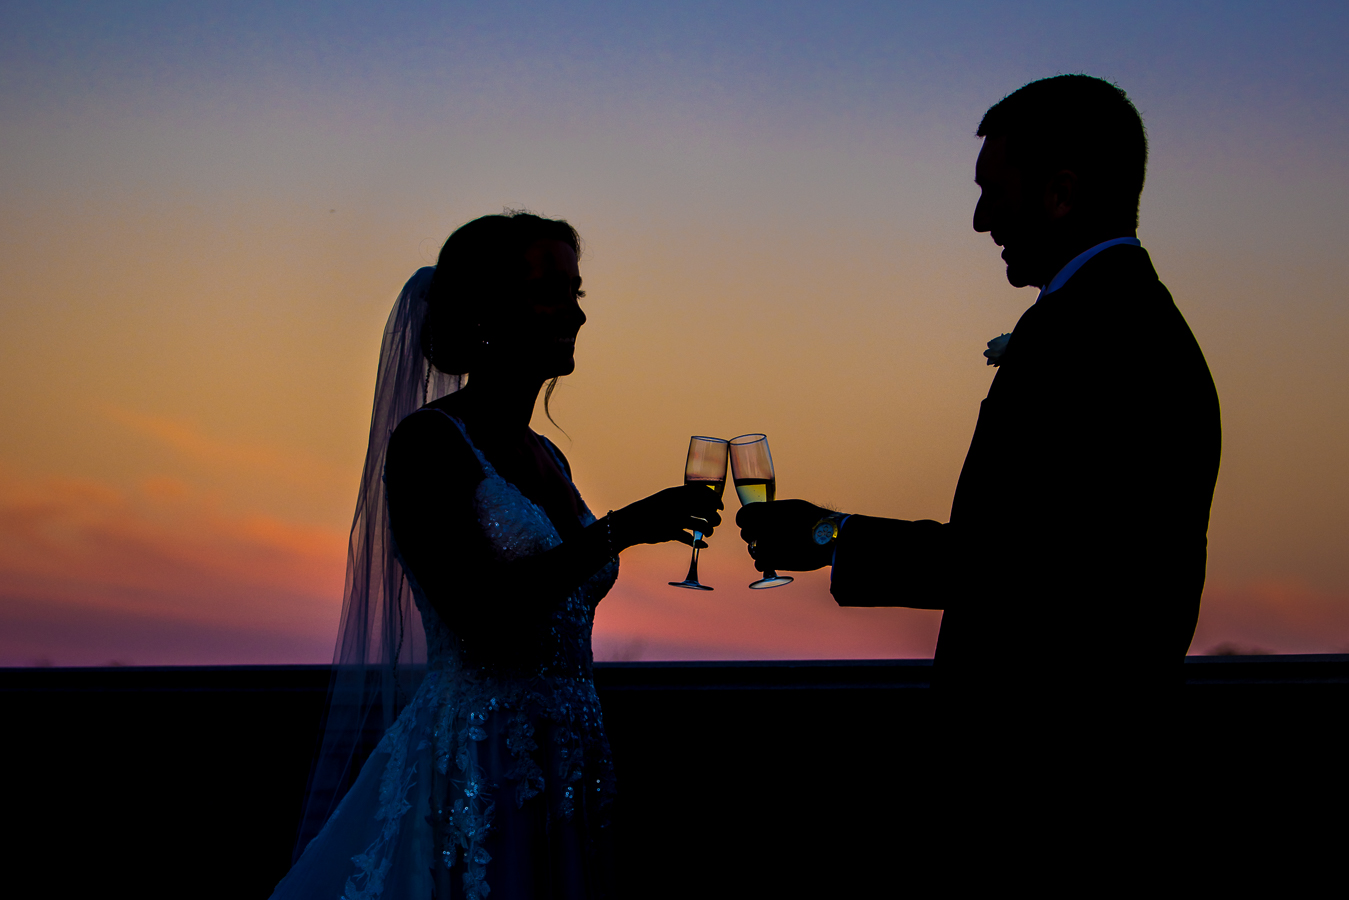 creative nj wedding photographer, lisa rhinehart, captures this unique, creative silhouetted image of the bride and groom as they share a drink while the vibrant, colorful sunset is captured behind them during their romantic portrait session before their black and gold wedding reception at the palace at somerset park in new jersey 